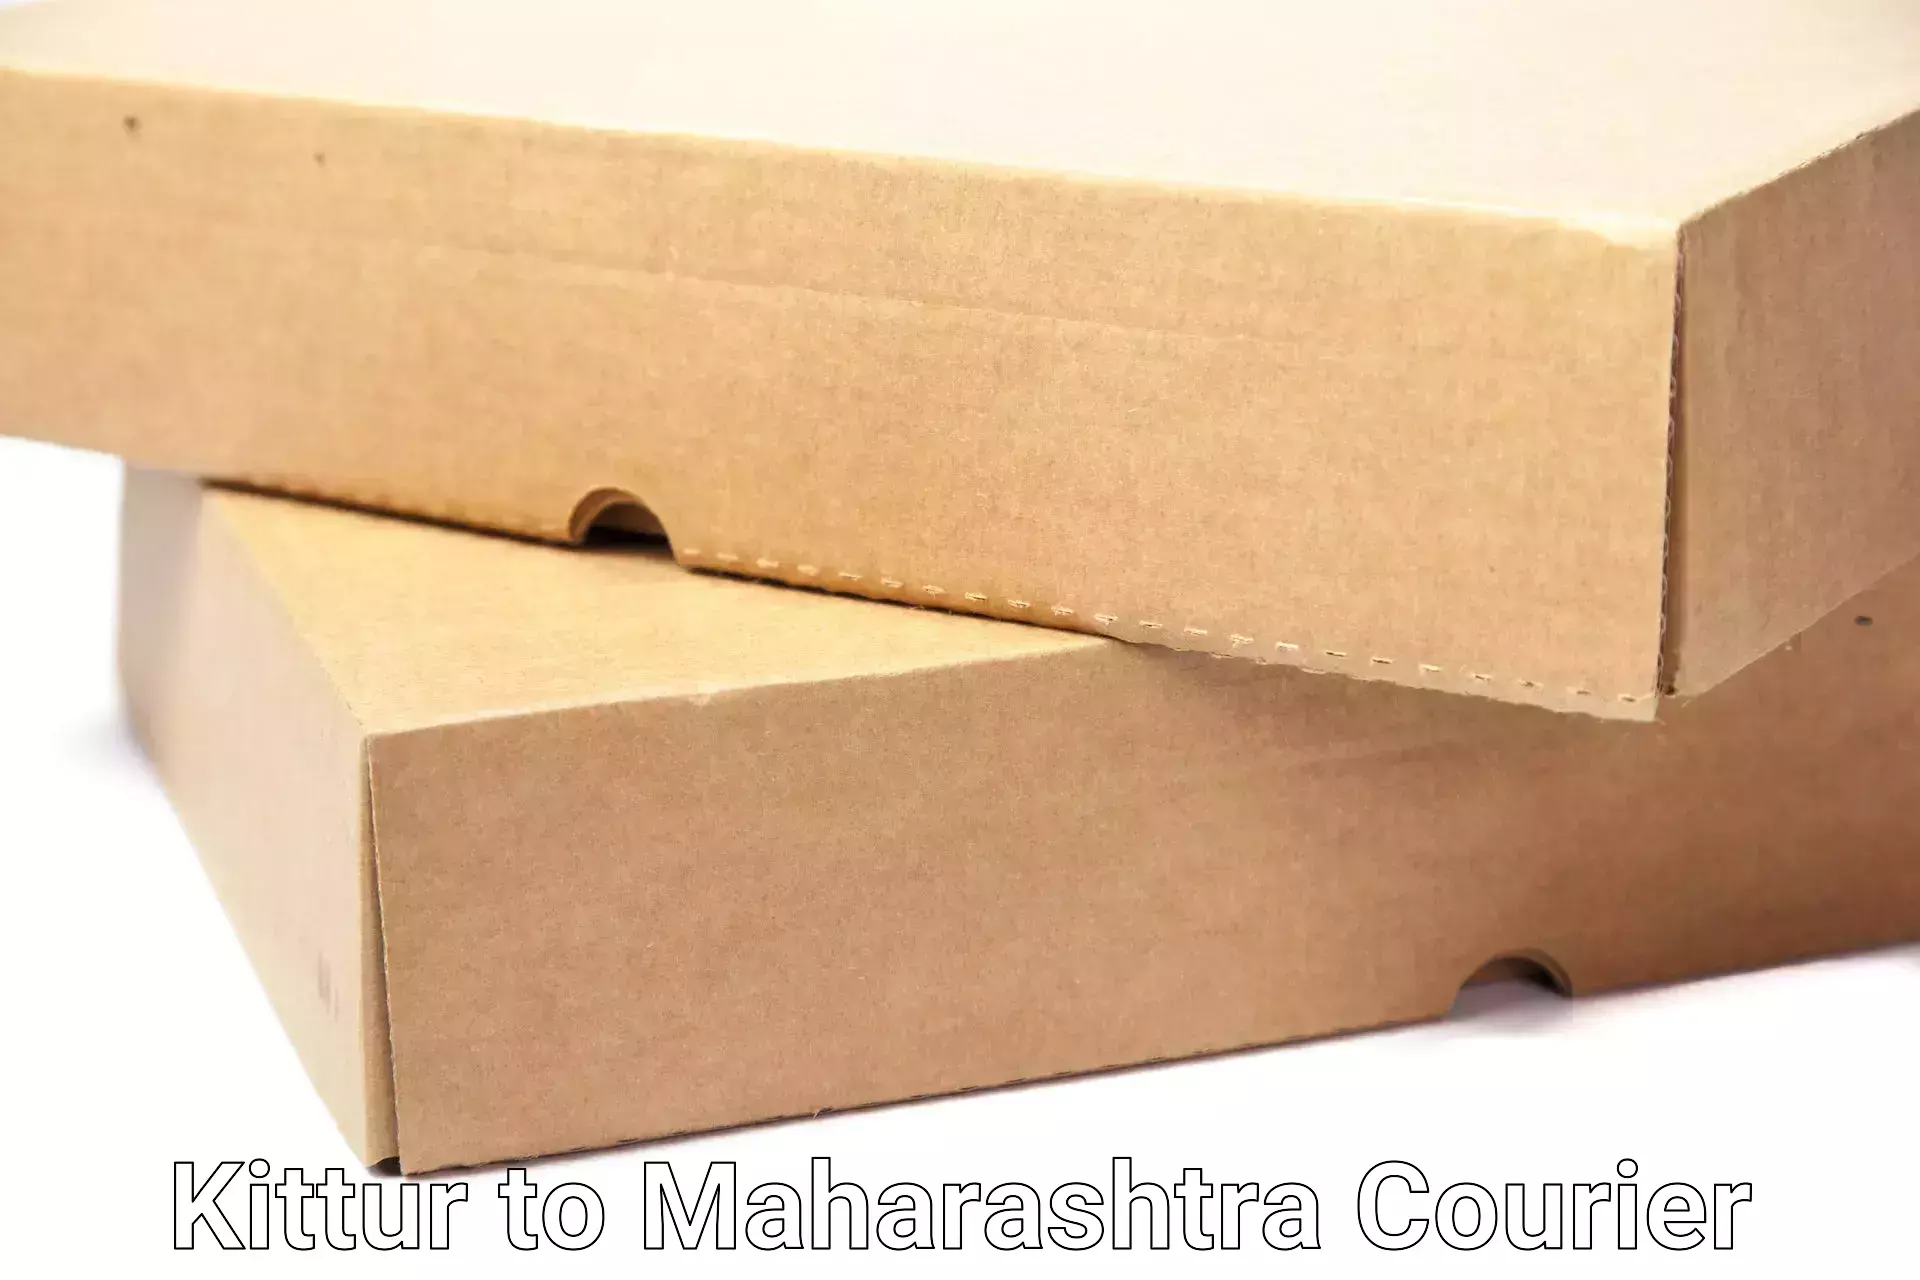 Furniture relocation experts in Kittur to Mhaswad